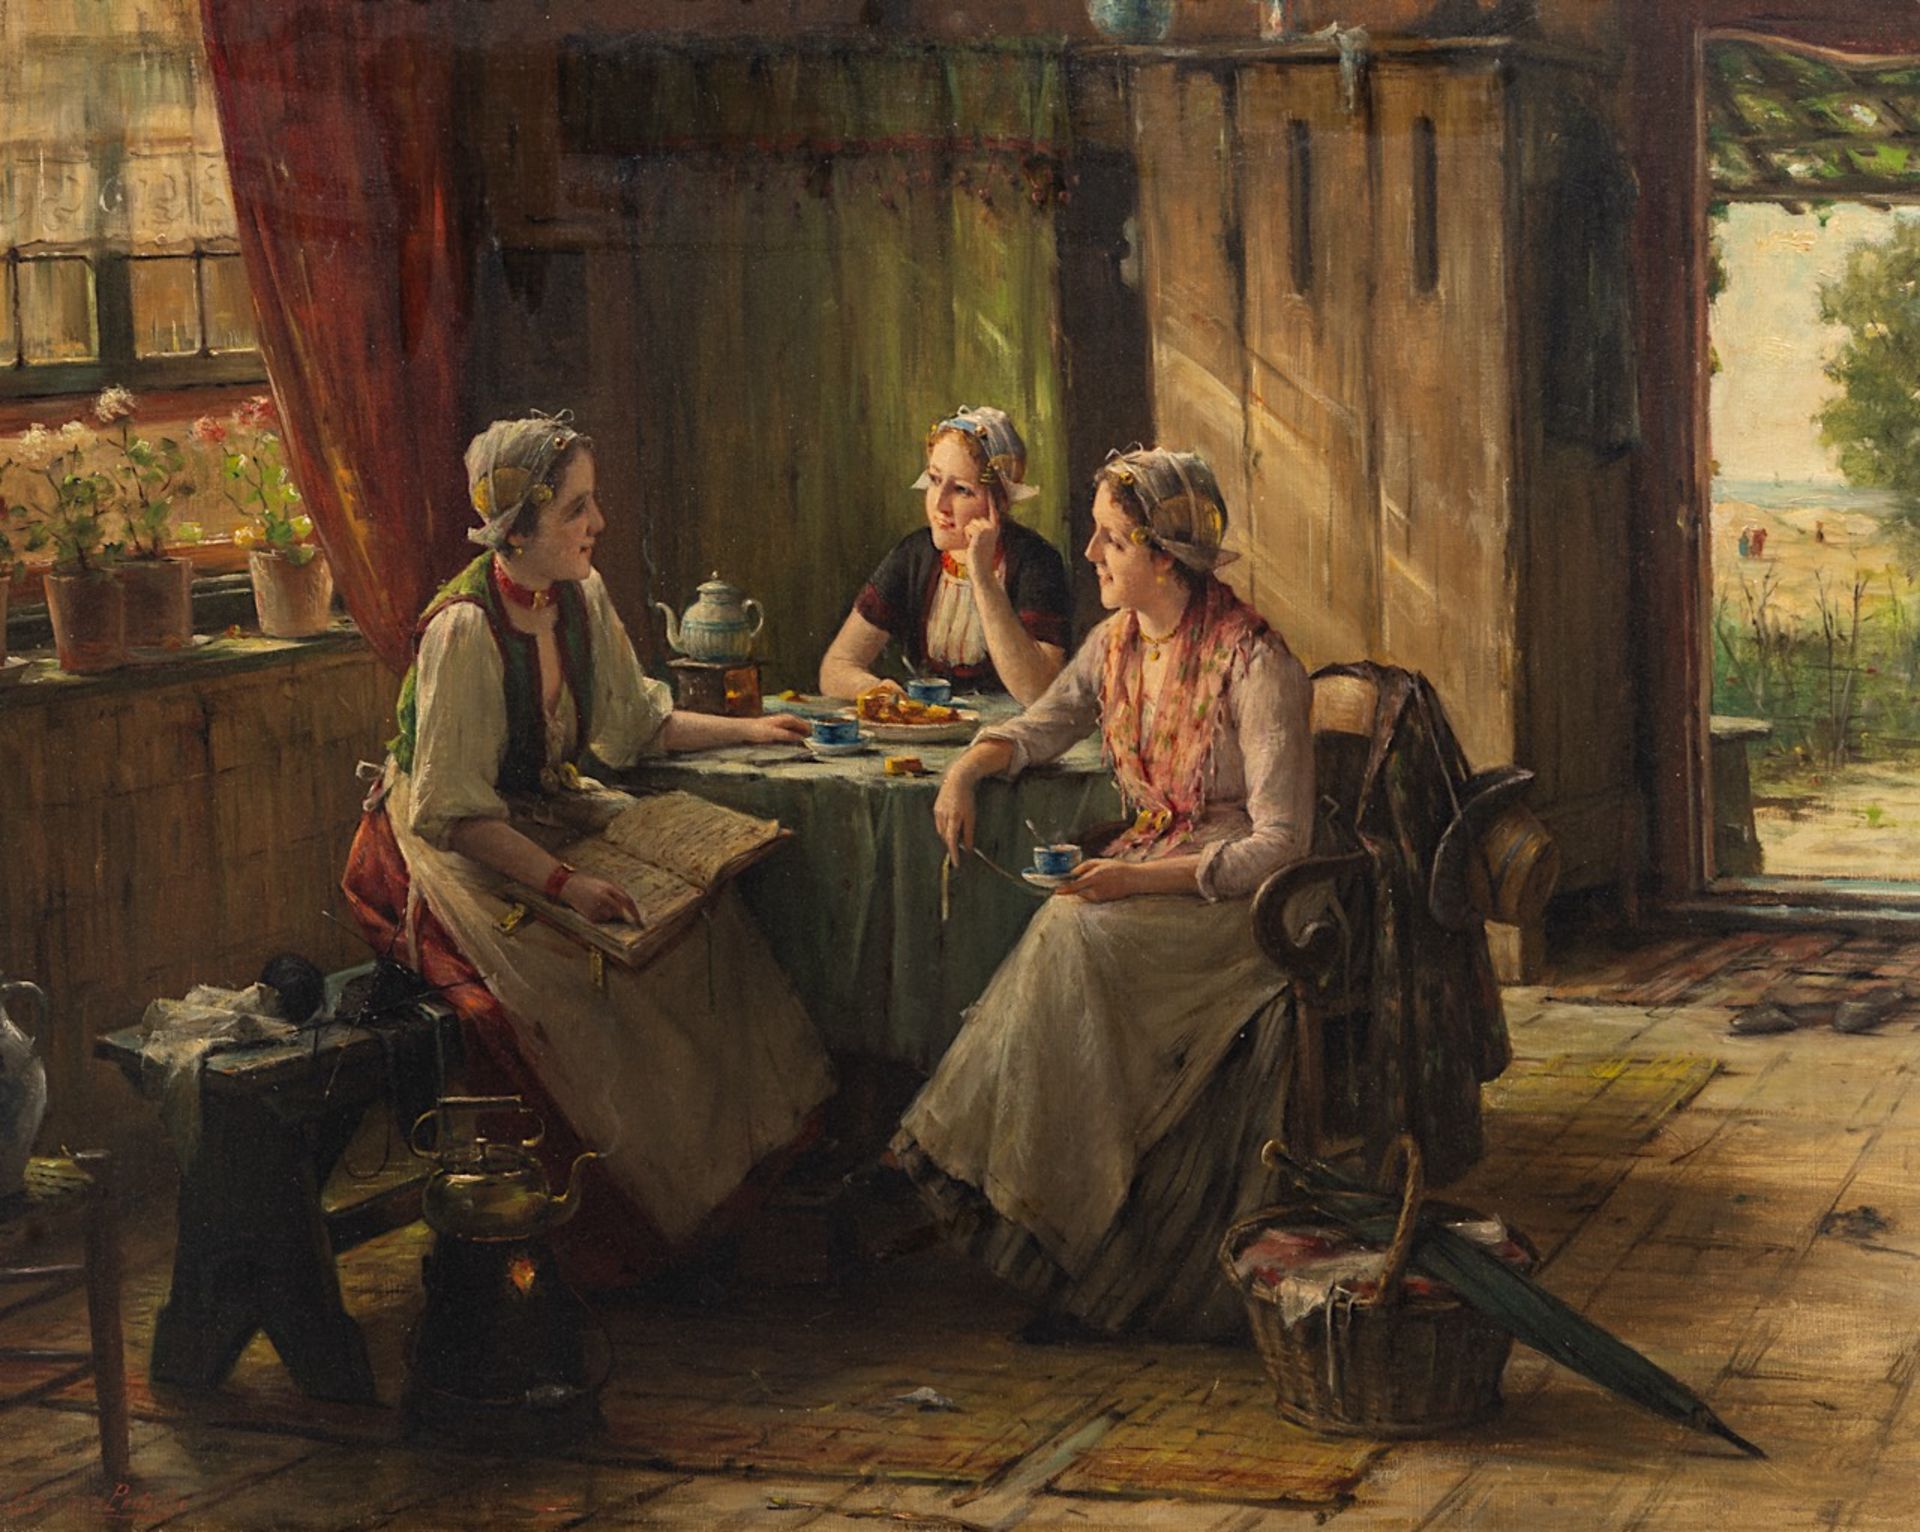 Edward Portielje (1861-1949), chatting maids over a cup of tea, oil on canvas 51 x 64 cm. (20.0 x 25